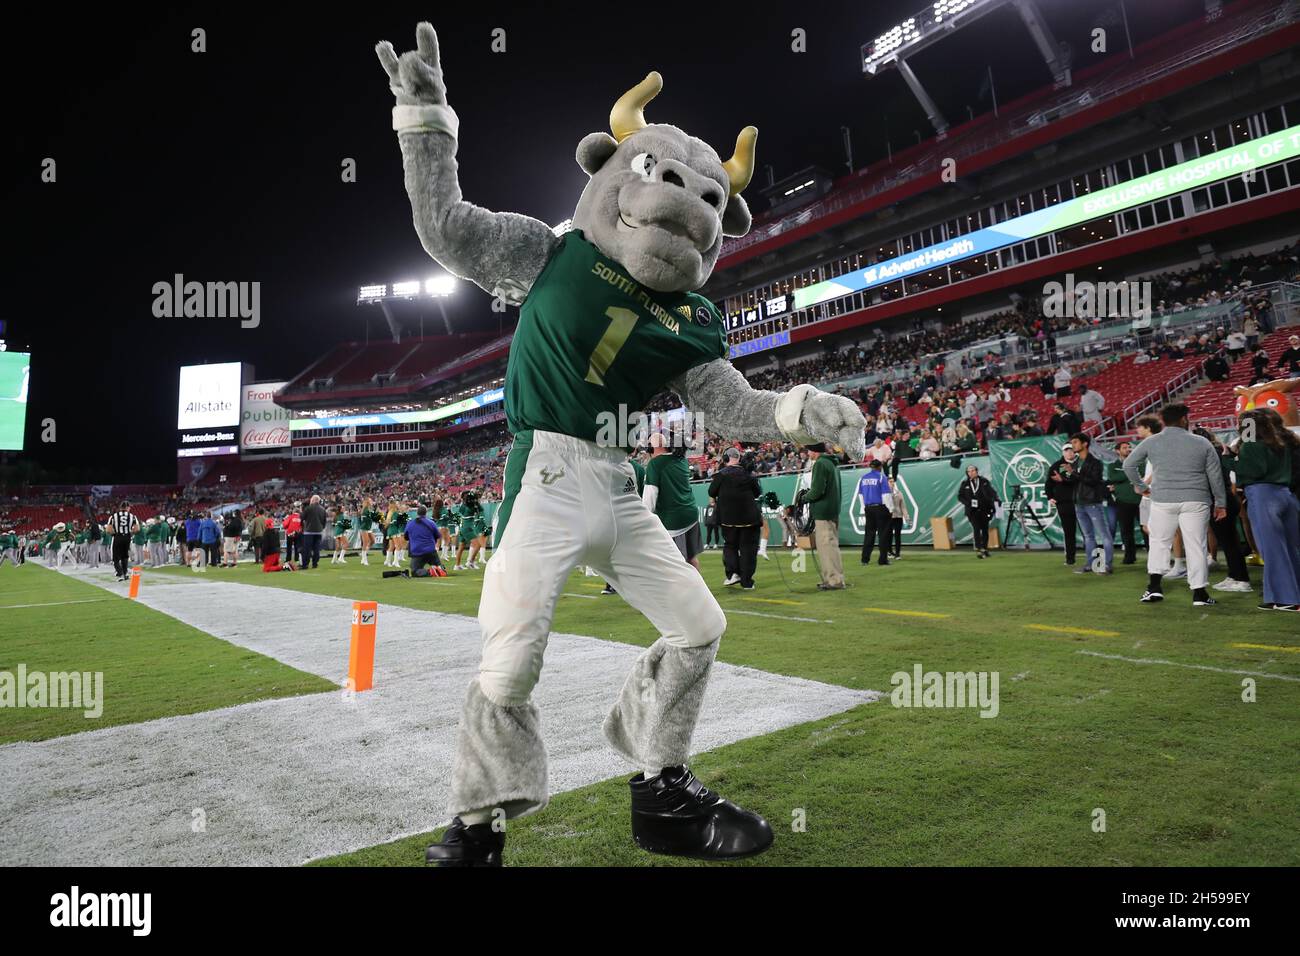 Tampa, FL, USA. 6th Nov, 2021. The South Florida Bulls mascot cheers works up the crow during the game between the Houston Cougars and the South Florida Bulls at Raymond James Stadium in Tampa, FL. (Photo by Peter Joneleit). Credit: csm/Alamy Live News Stock Photo